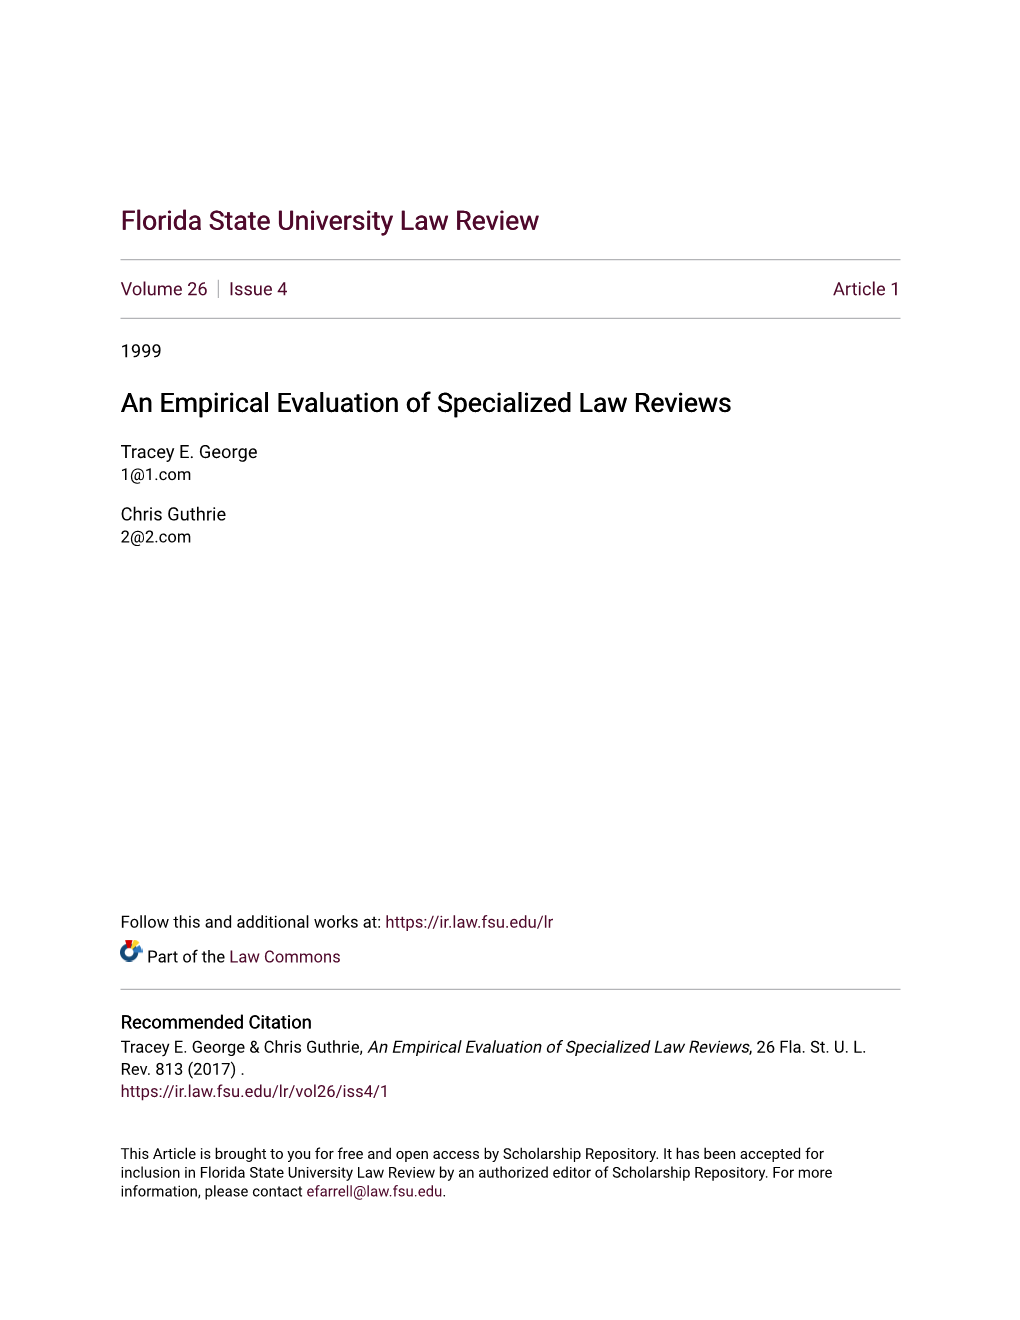 An Empirical Evaluation of Specialized Law Reviews